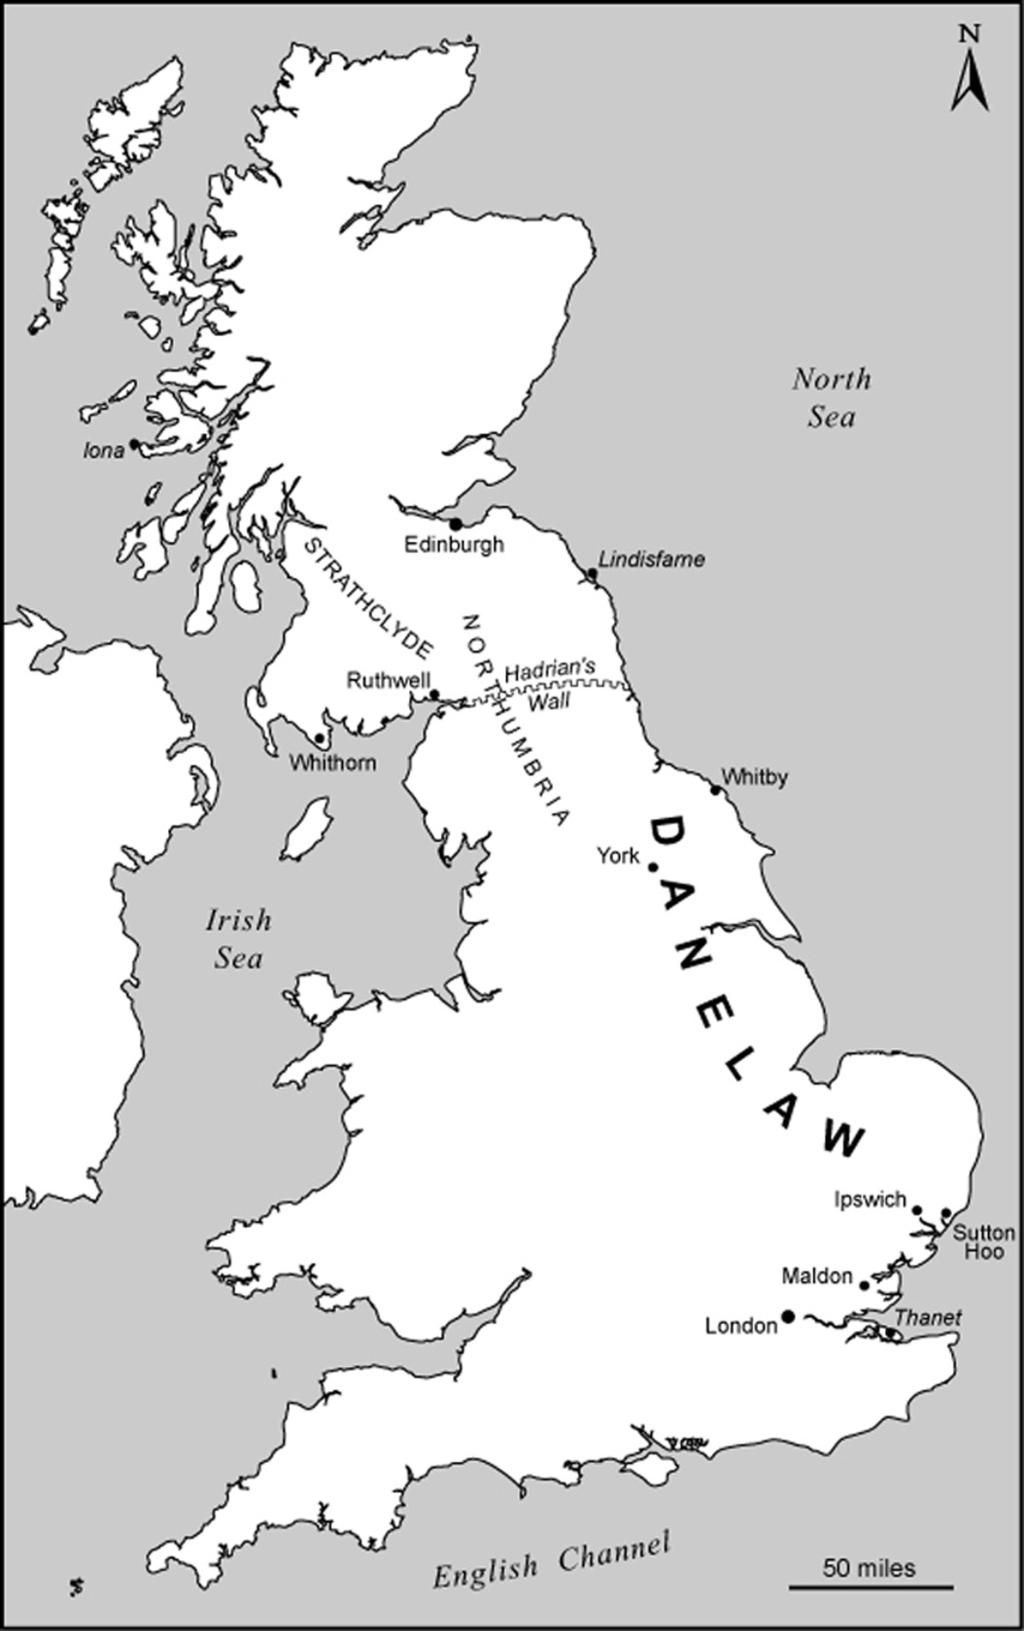 Origins 7 3 Britain and the Danelaw glossed difficult Latin words in Old English had used a mixture of the Roman alphabet used for Latin and the ancient runic alphabet used by Germanic tribes on the